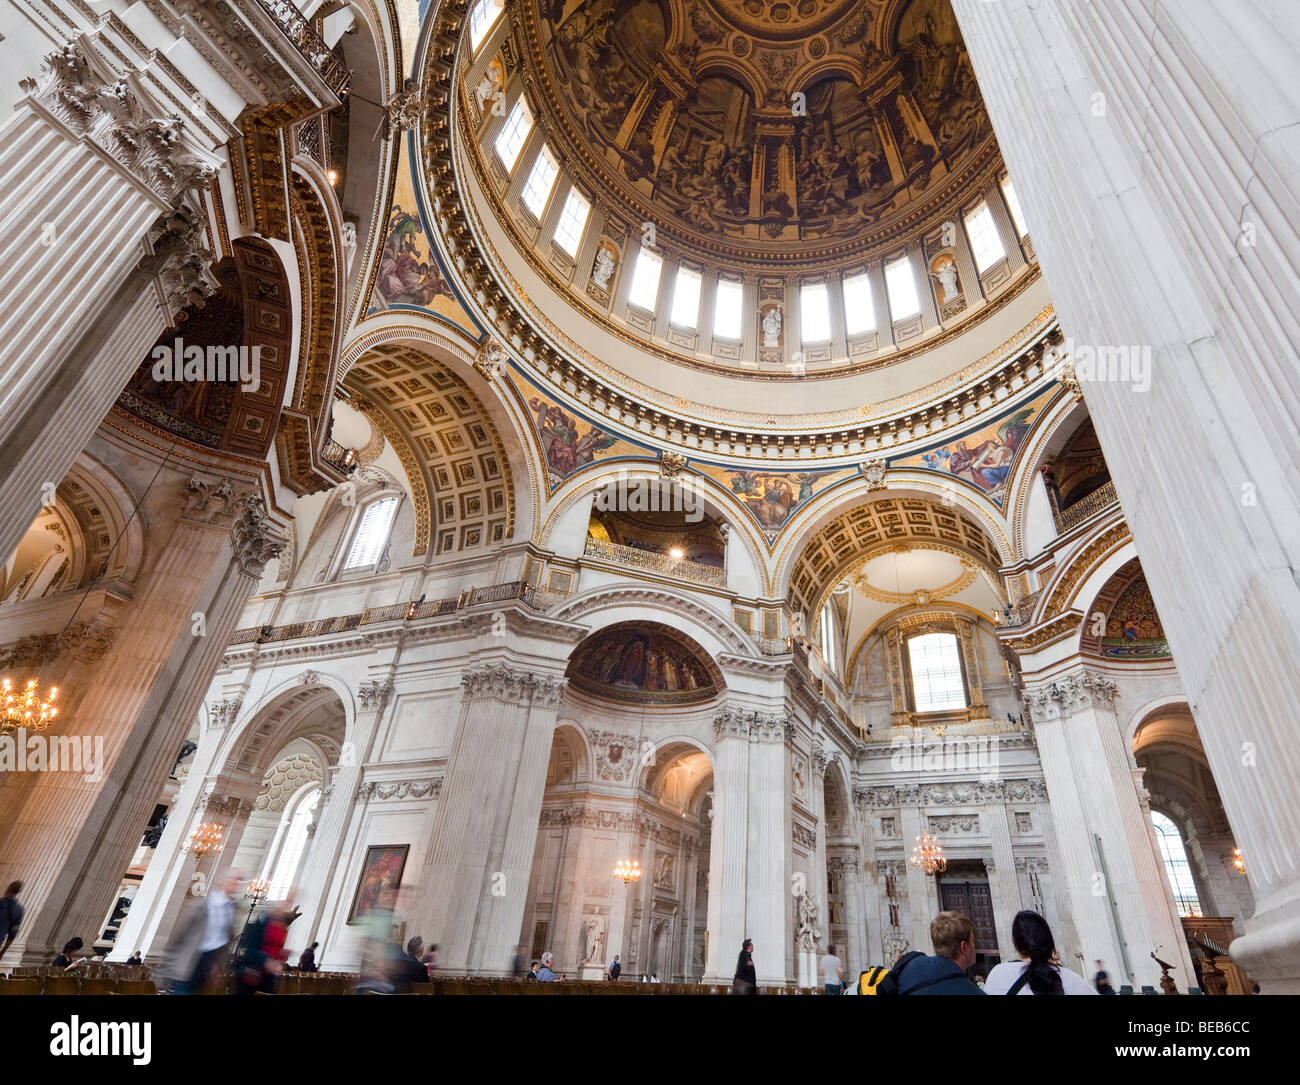 interior, St. Paul's cathedral, London, England, UK Stock Photo